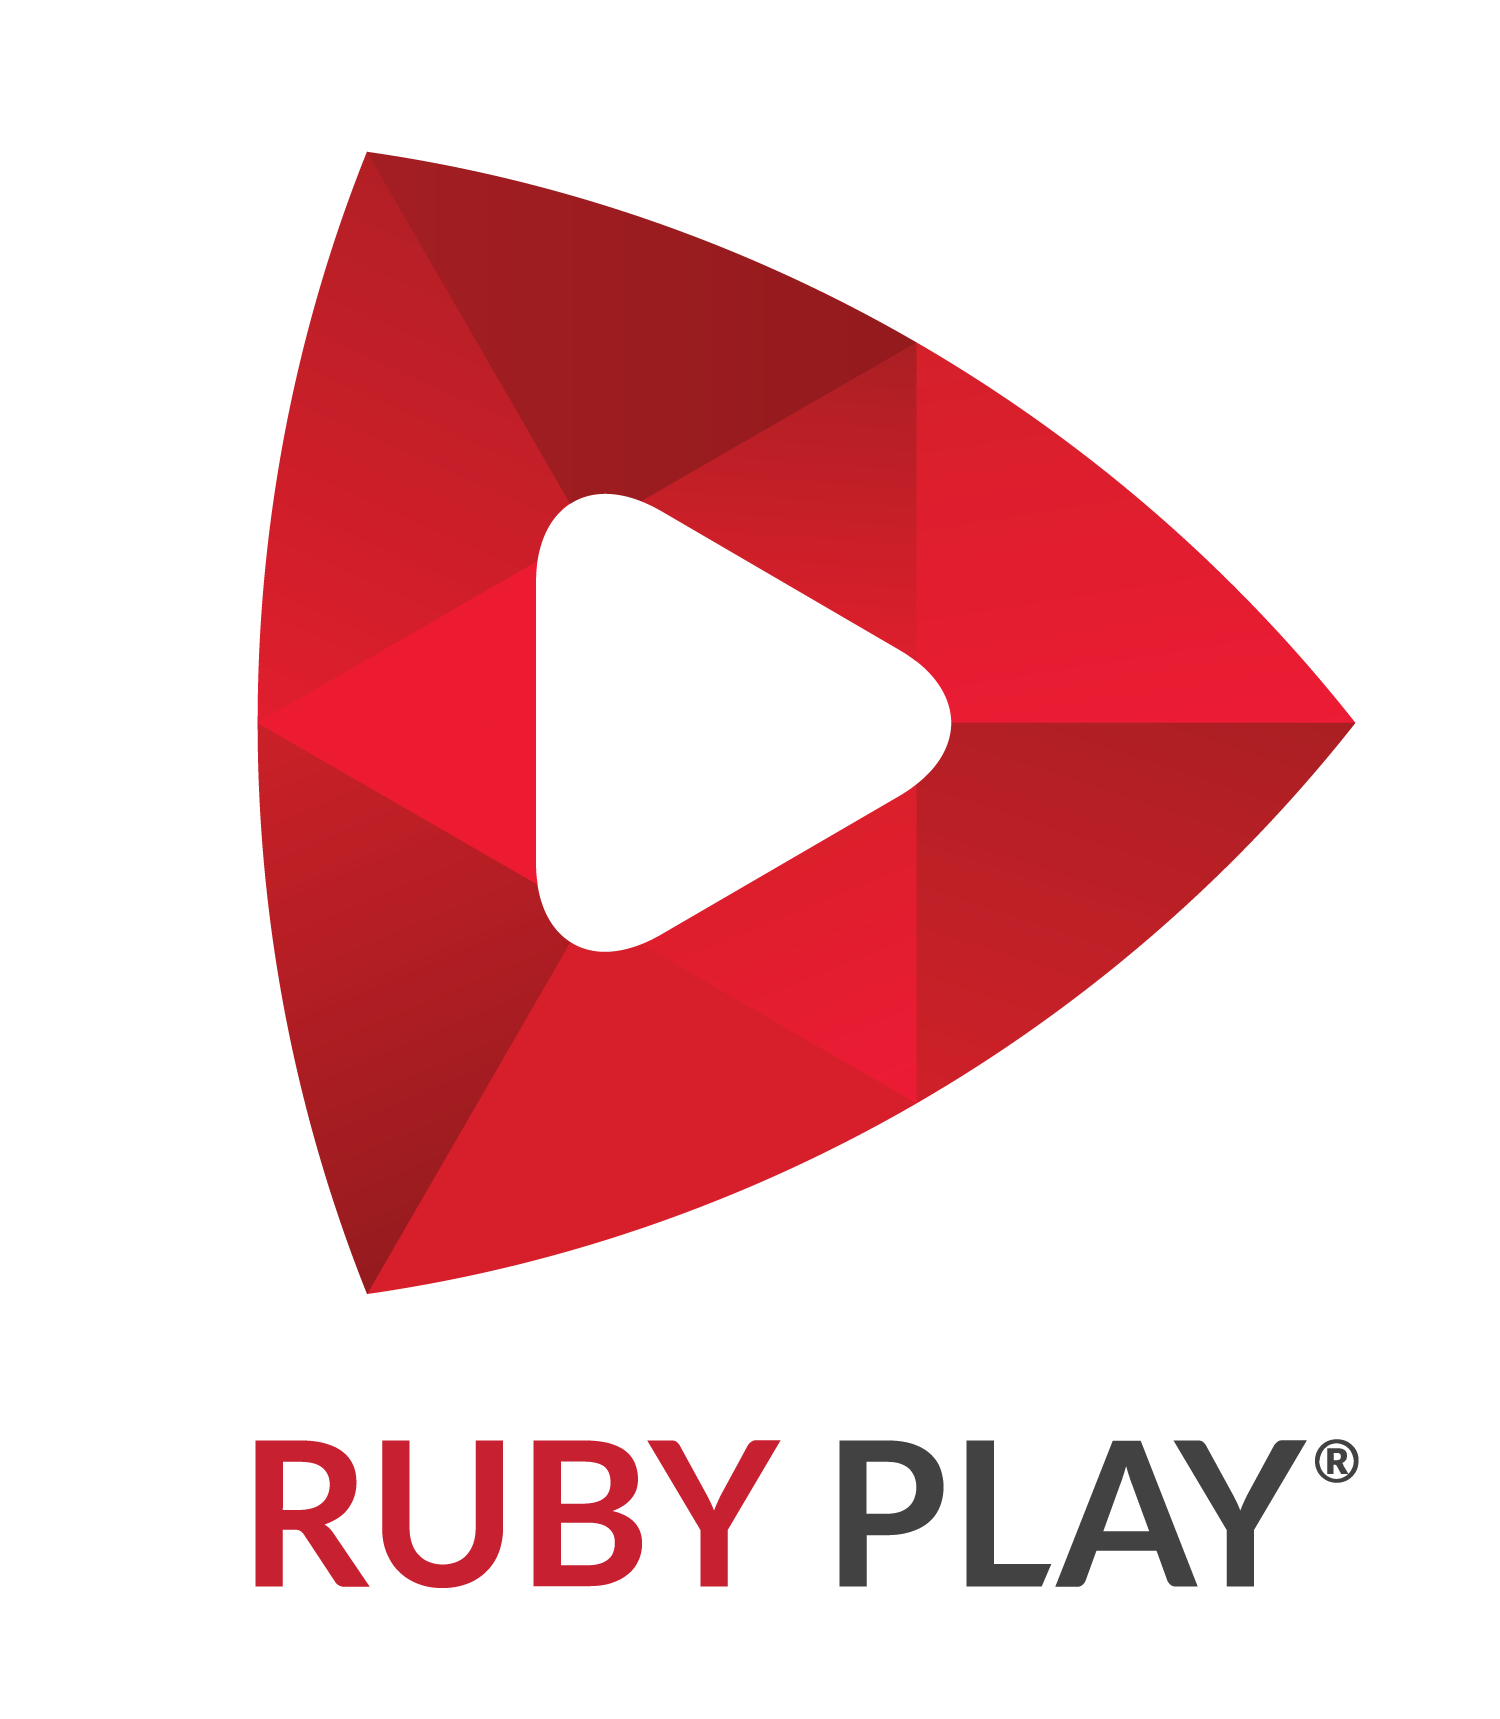 Ruby Play slots and games online for free or real money